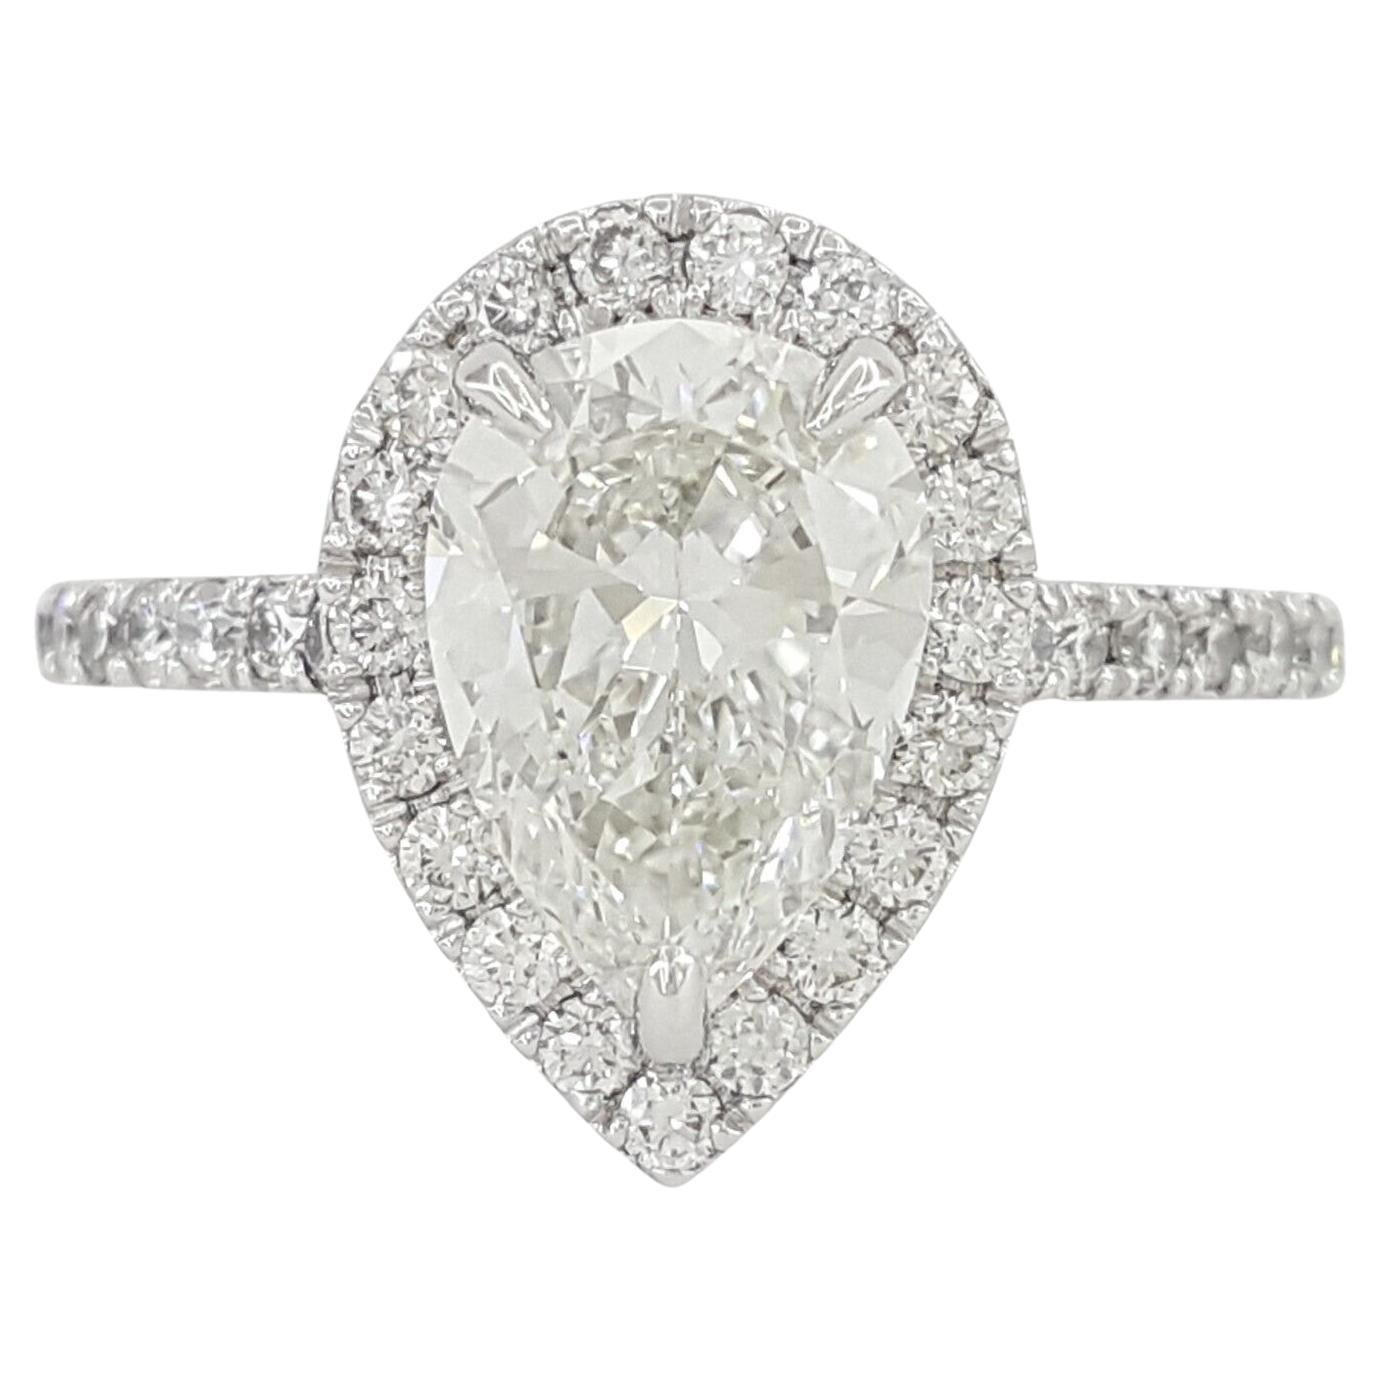 GIA Certified 1.83 Carat Pear Cut Diamond Ring For Sale